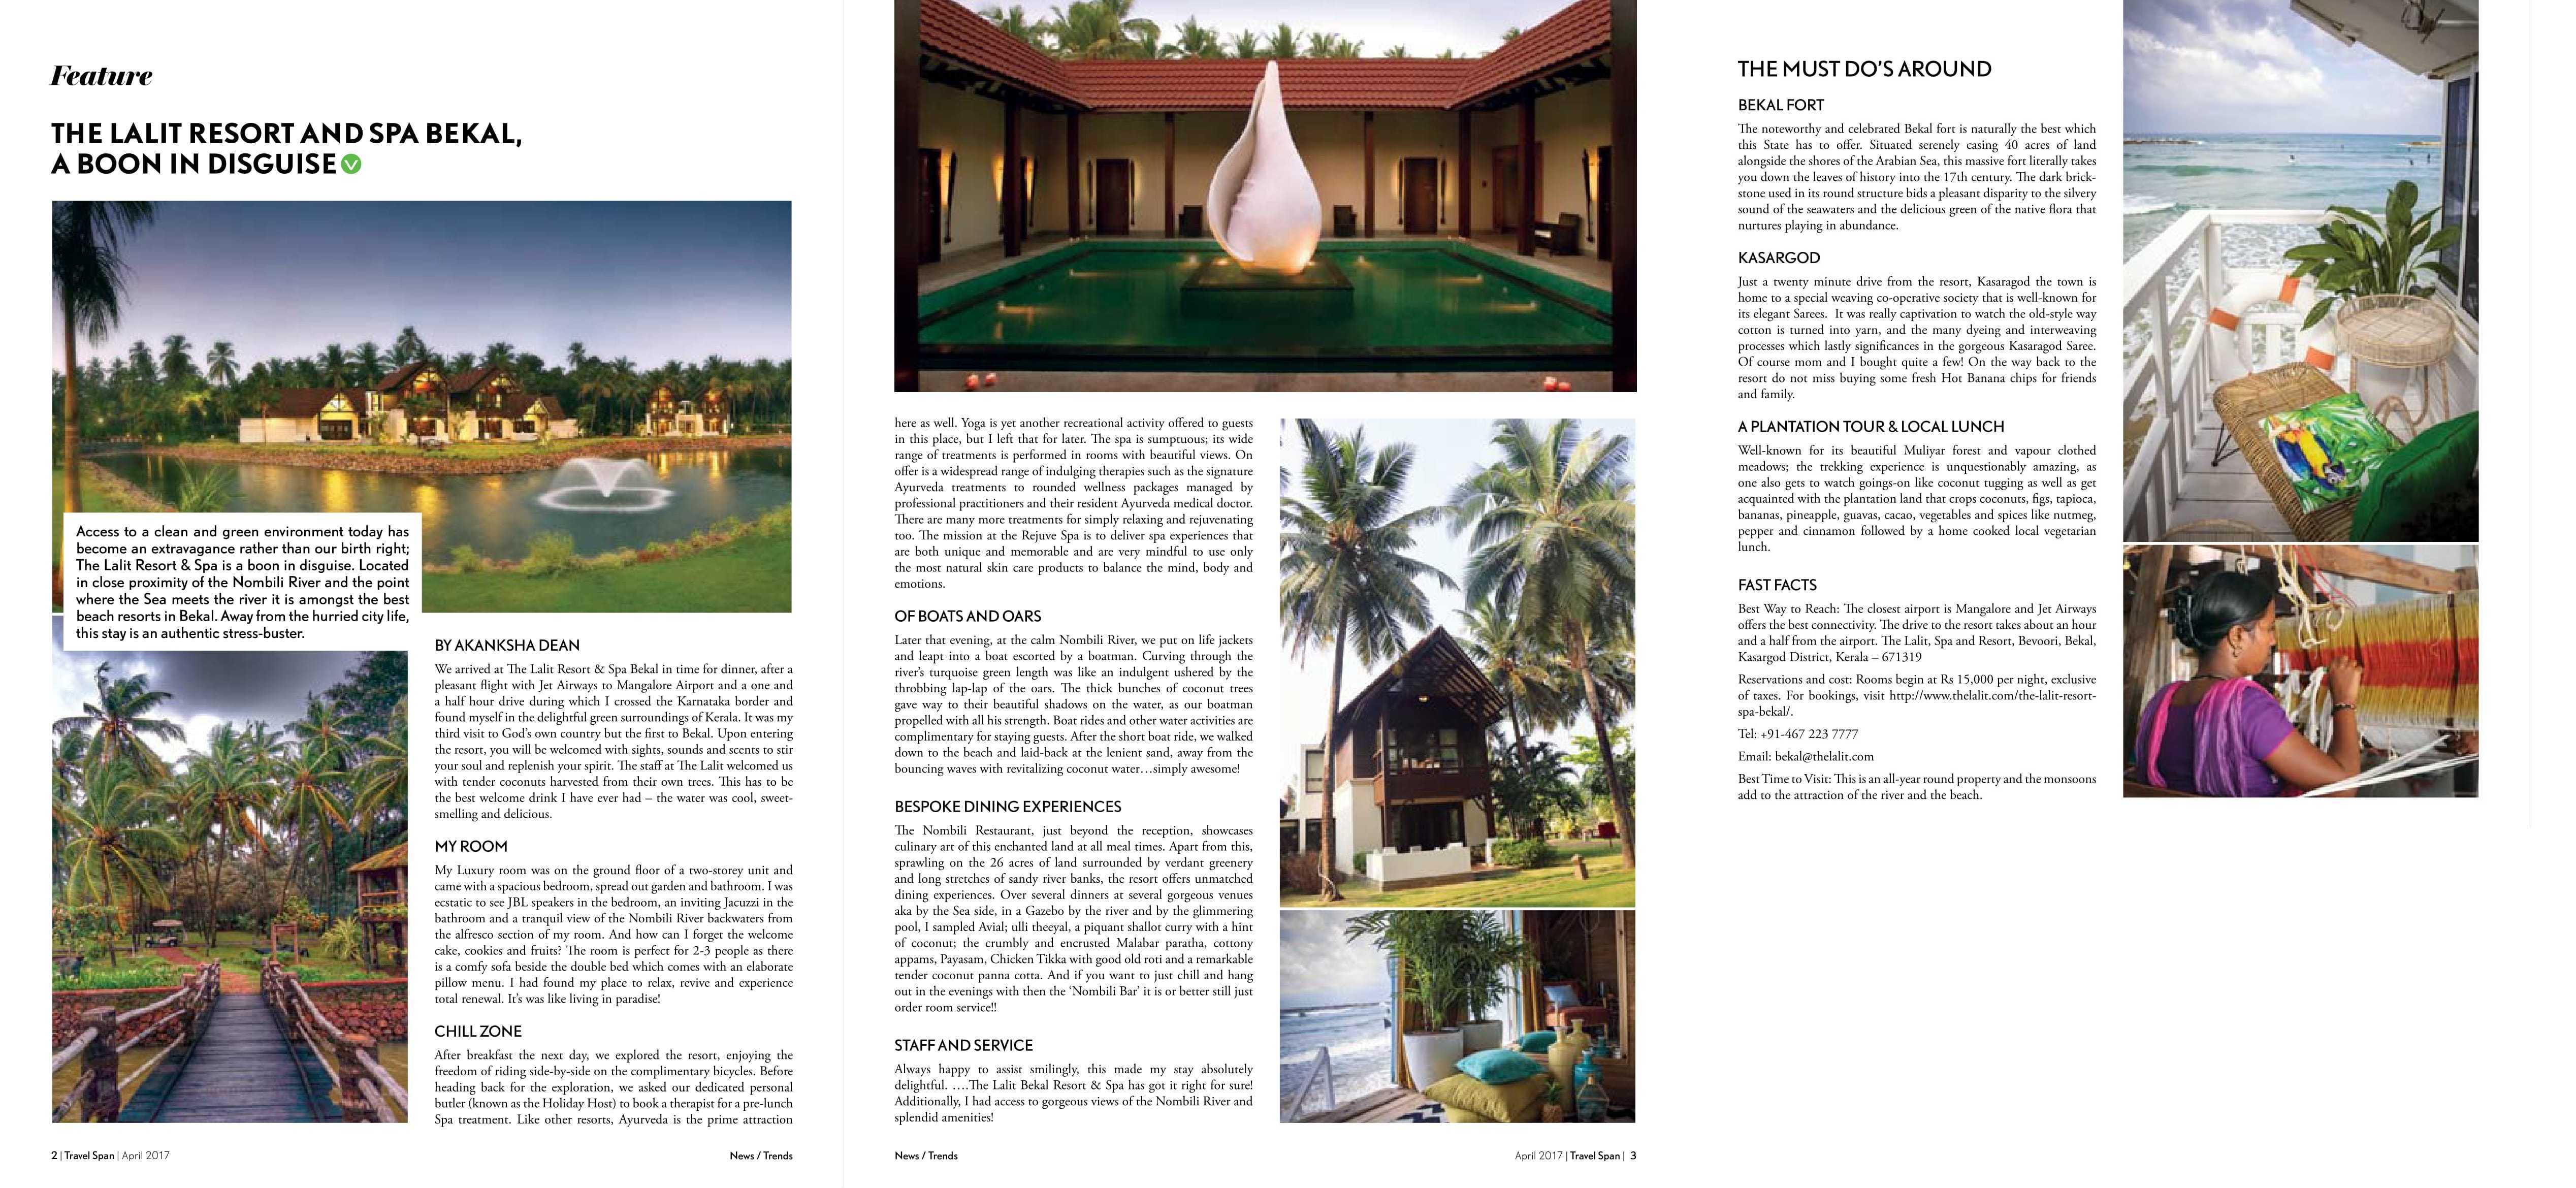 The LaLiT Resort & Spa Bekal, A boon in disguise